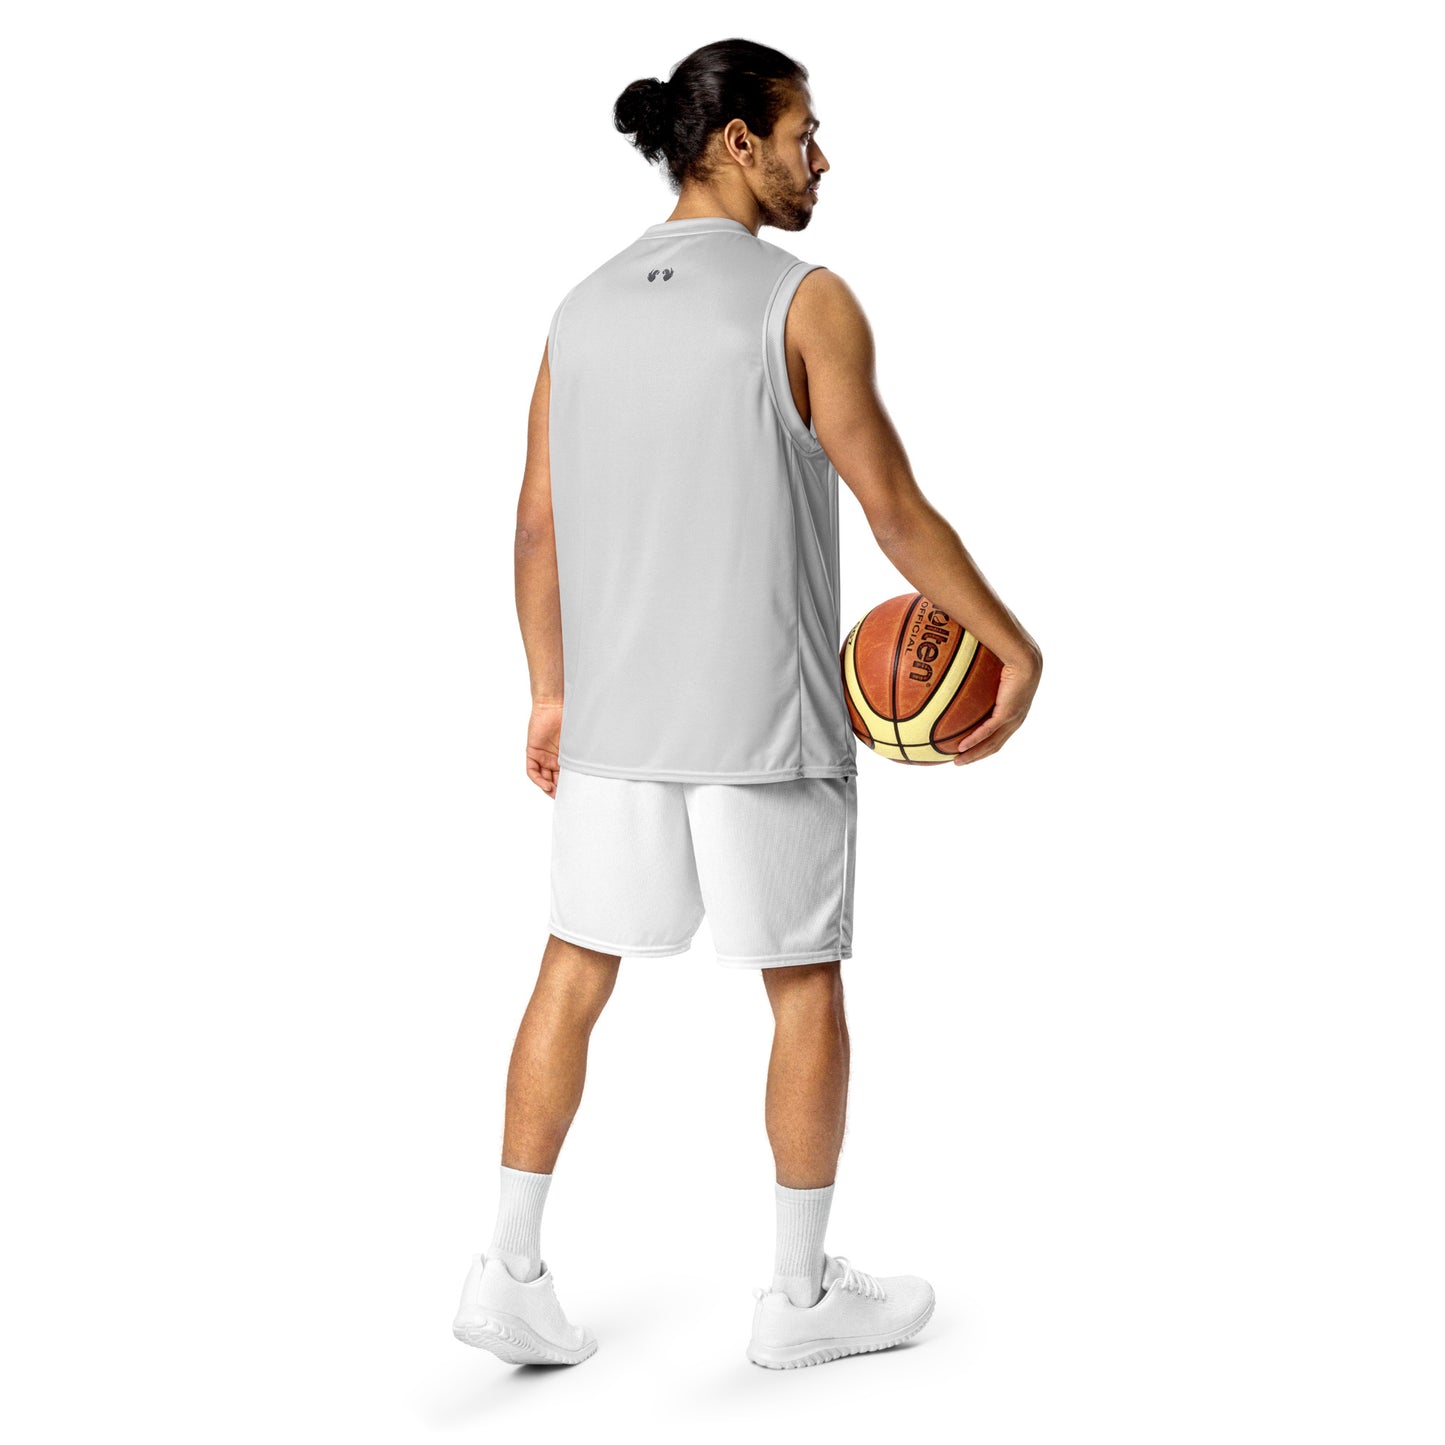 Rep Your Values, Own Your Game: Eco-Conscious Custom Basketball Jersey (Unisex)